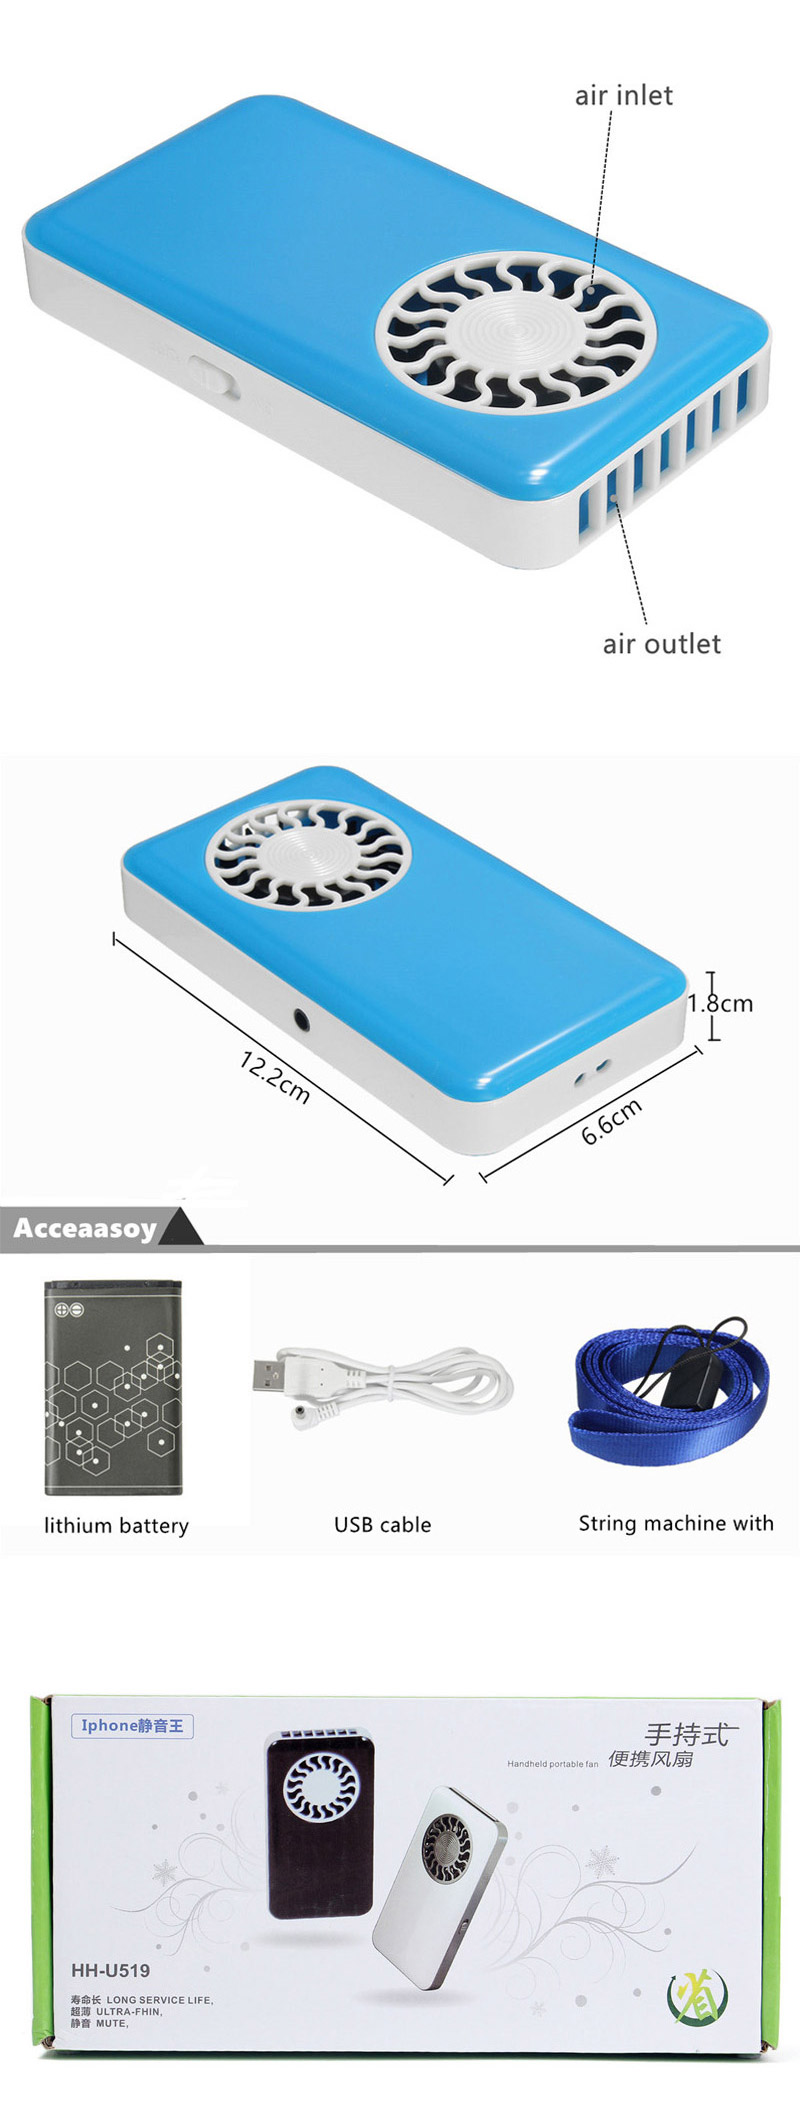 Portable Handheld USB Mini Cooler Fan With Rechargeable Battery 8